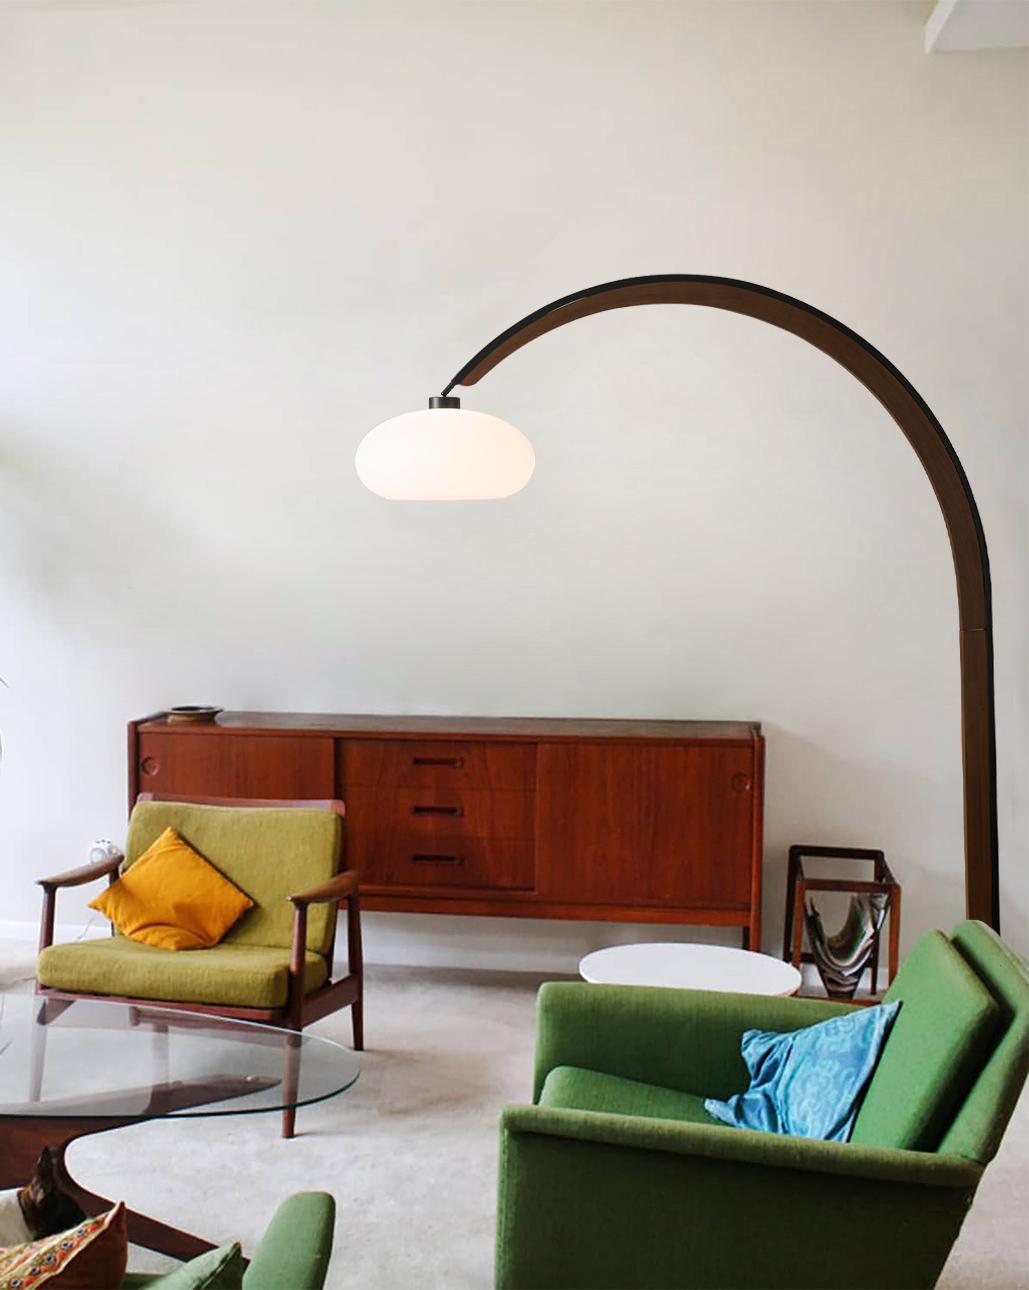 Vaulted 86″ Arc Lamp in Weathered Brass and Walnut with Dimmer Switch designed by Peter Morelli in 1968